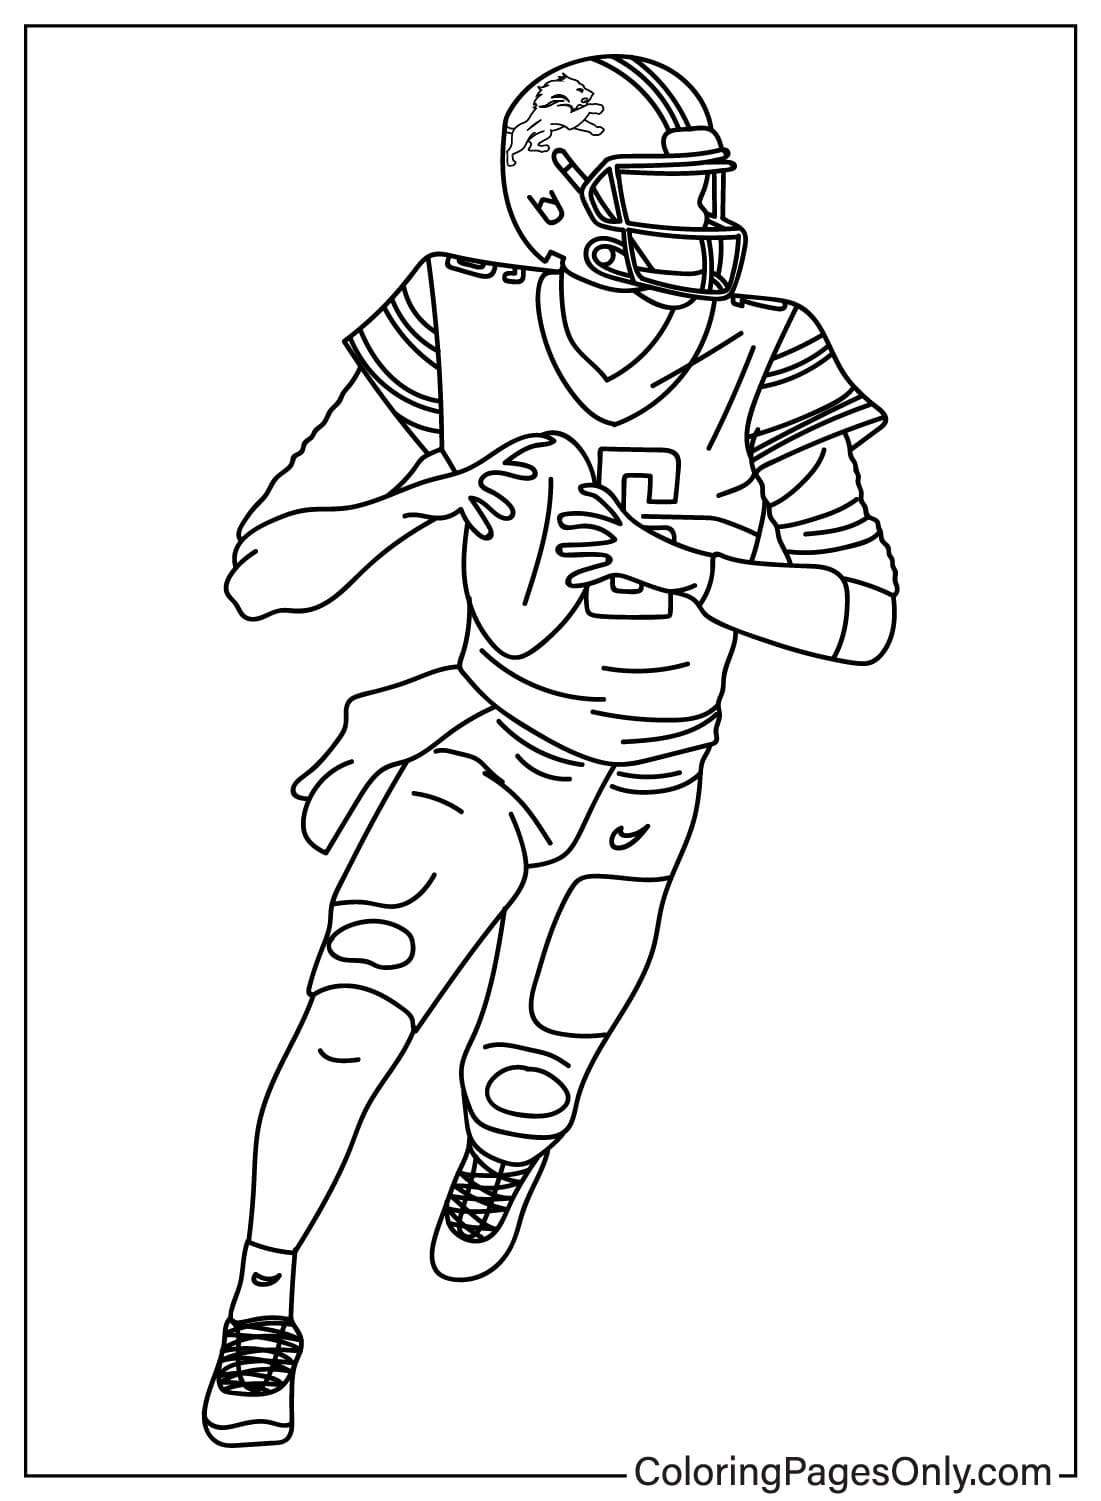 Jared Goff Coloring Page Free from Detroit Lions